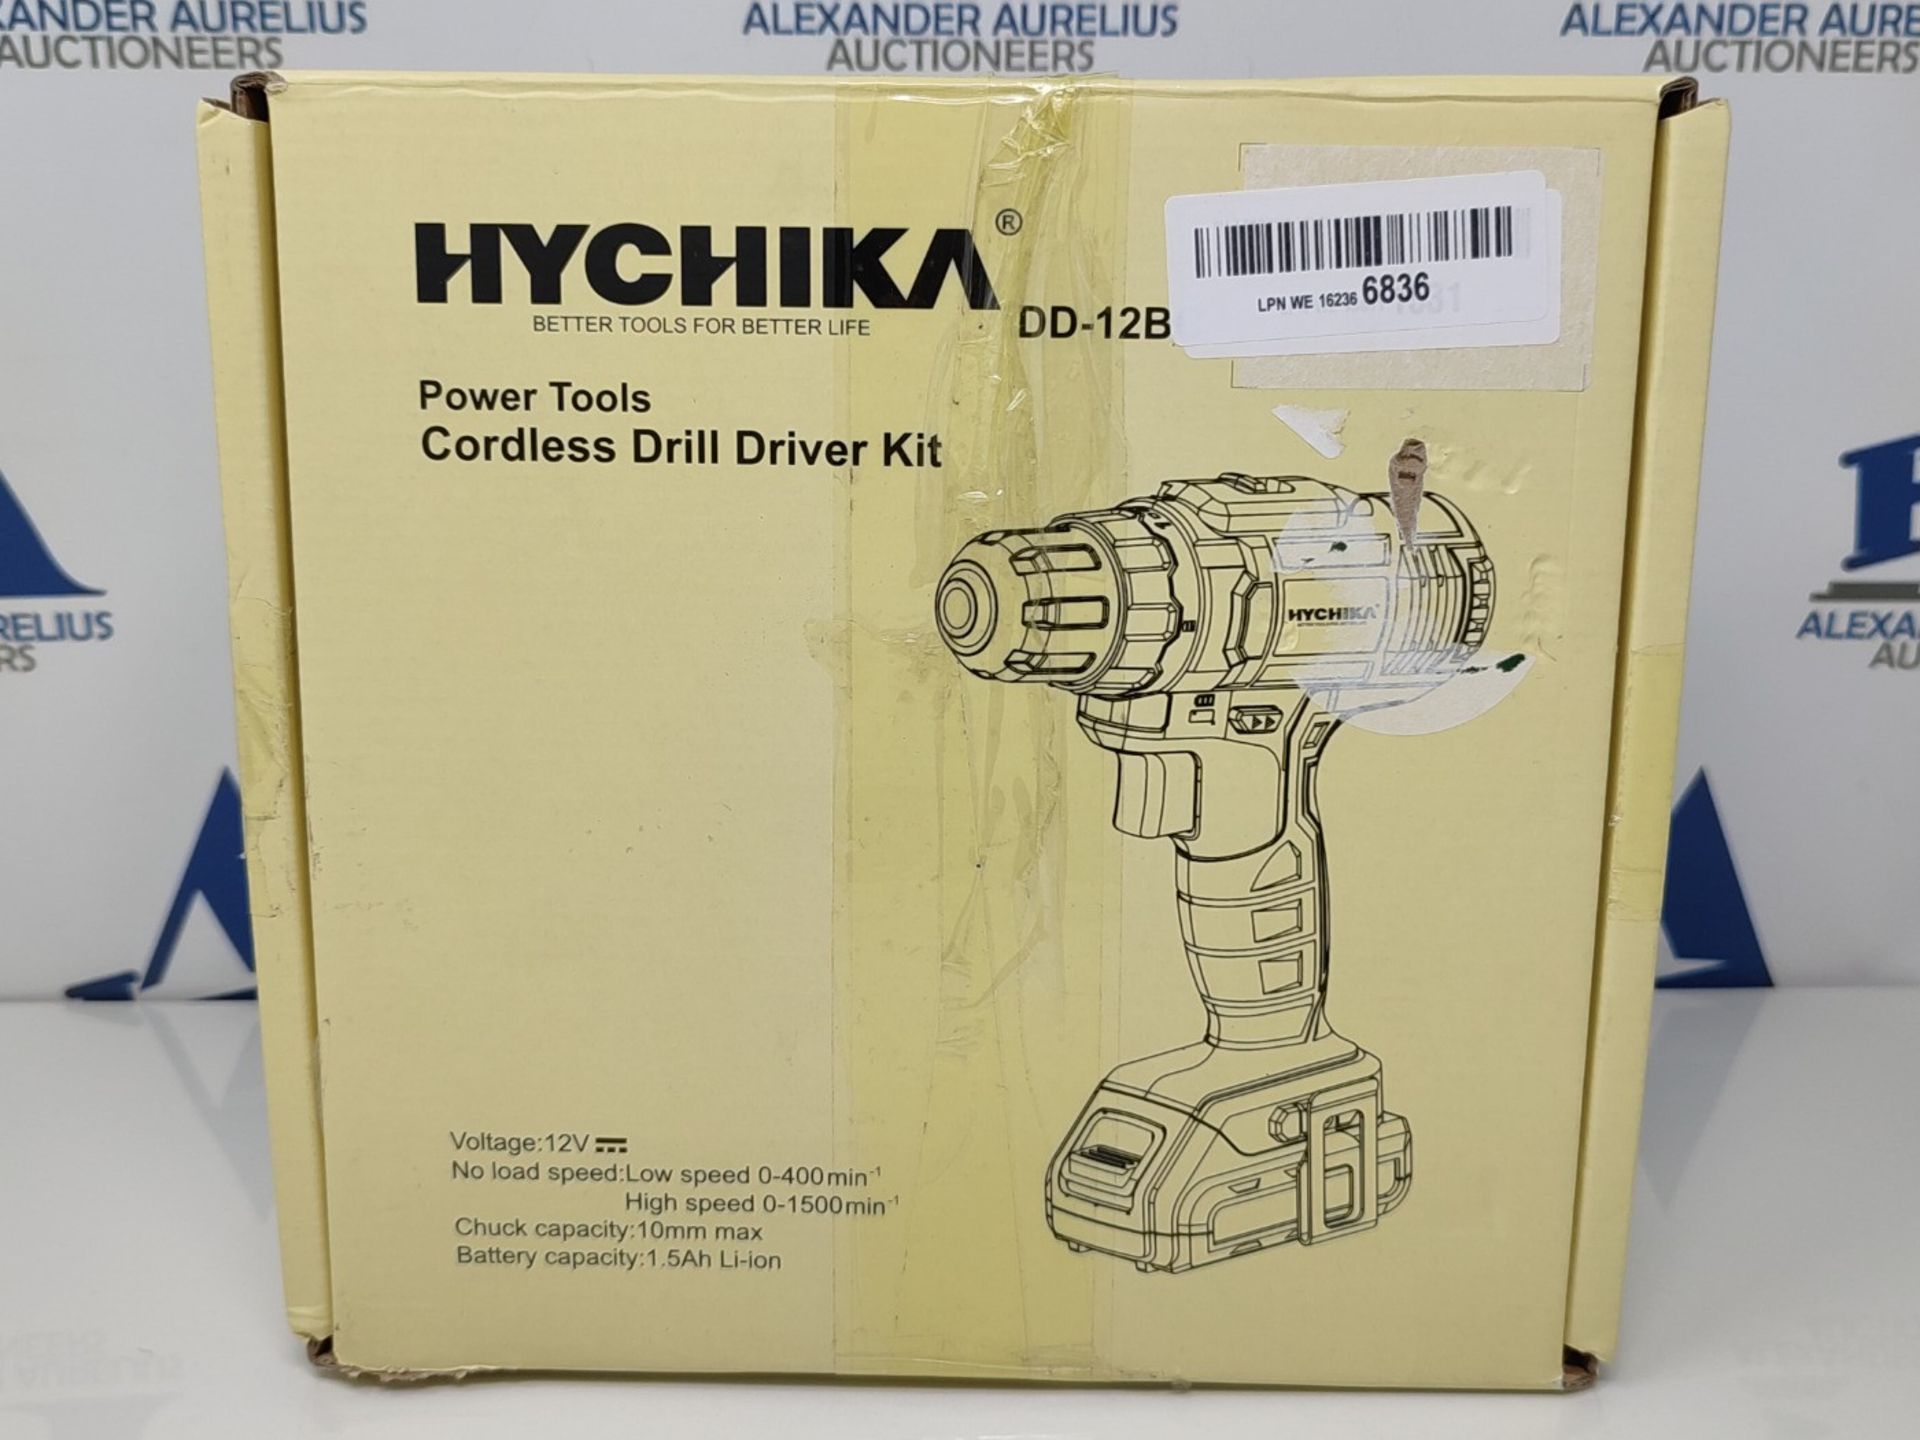 Cordless Drill 12V, HYCHIKA Electric Screwdriver 30N·m, 21+1 Torque, 2-Variable Speed - Image 2 of 3